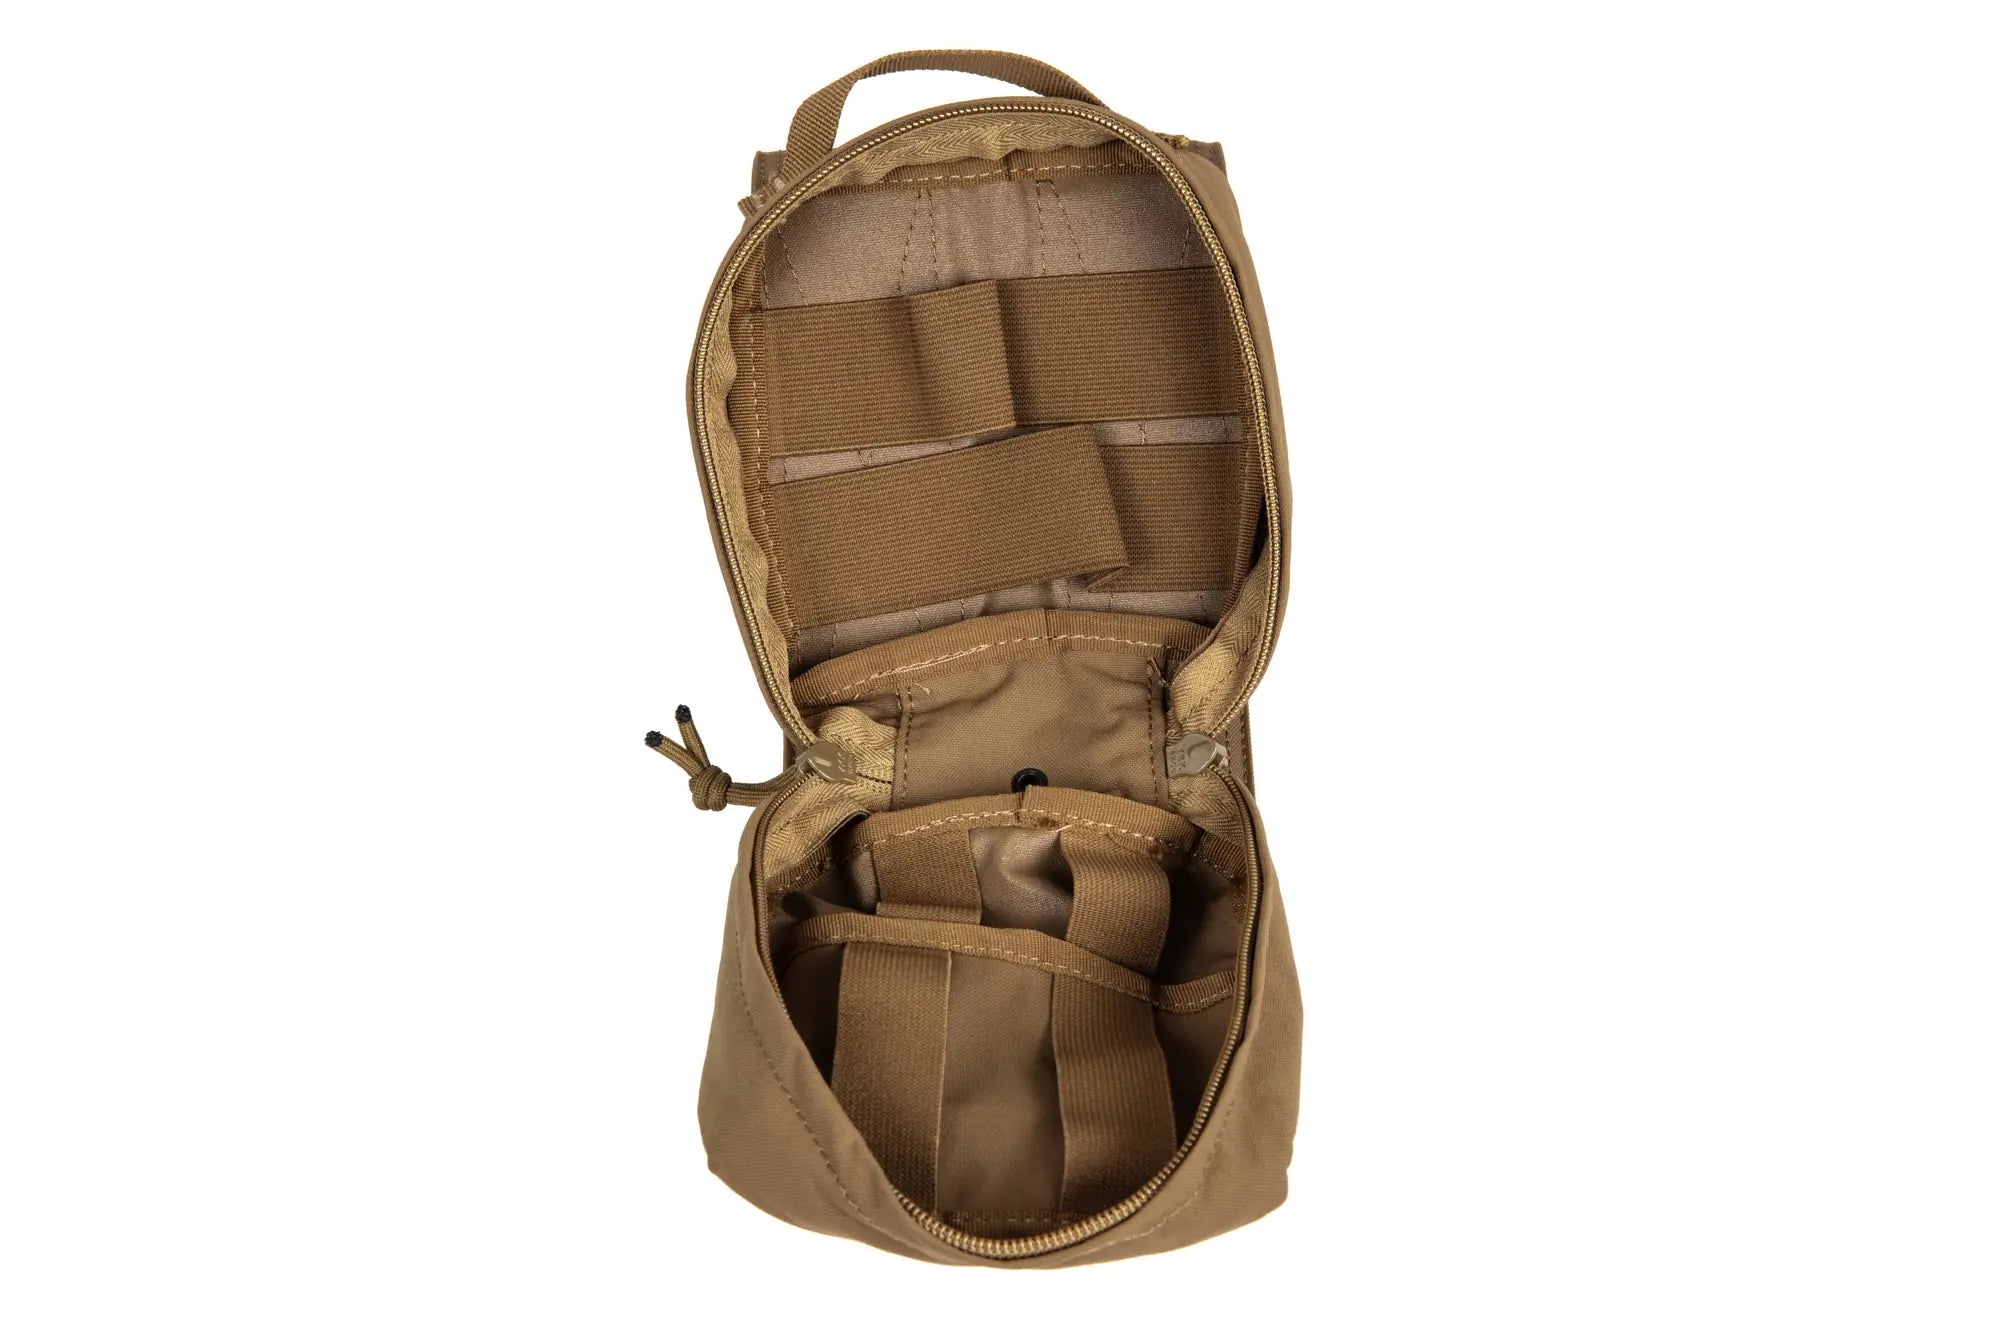 First aid kit with Molle panel Wosport Coyote Brown-3